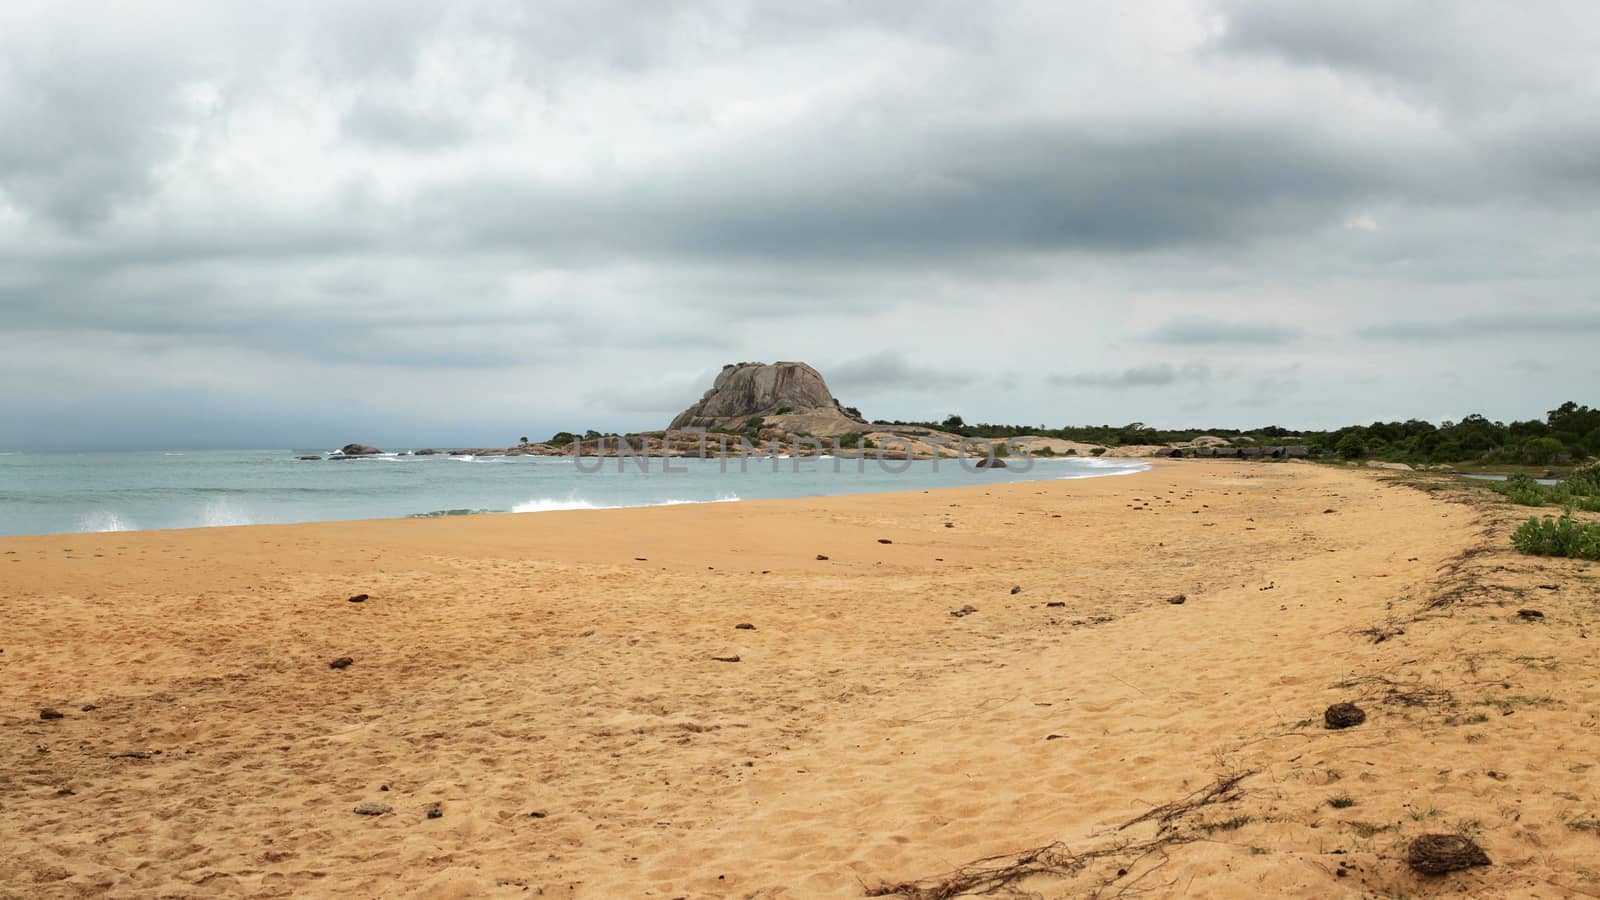 Beach with single hill (Patanangala rock) in distance on overcas by Ivanko